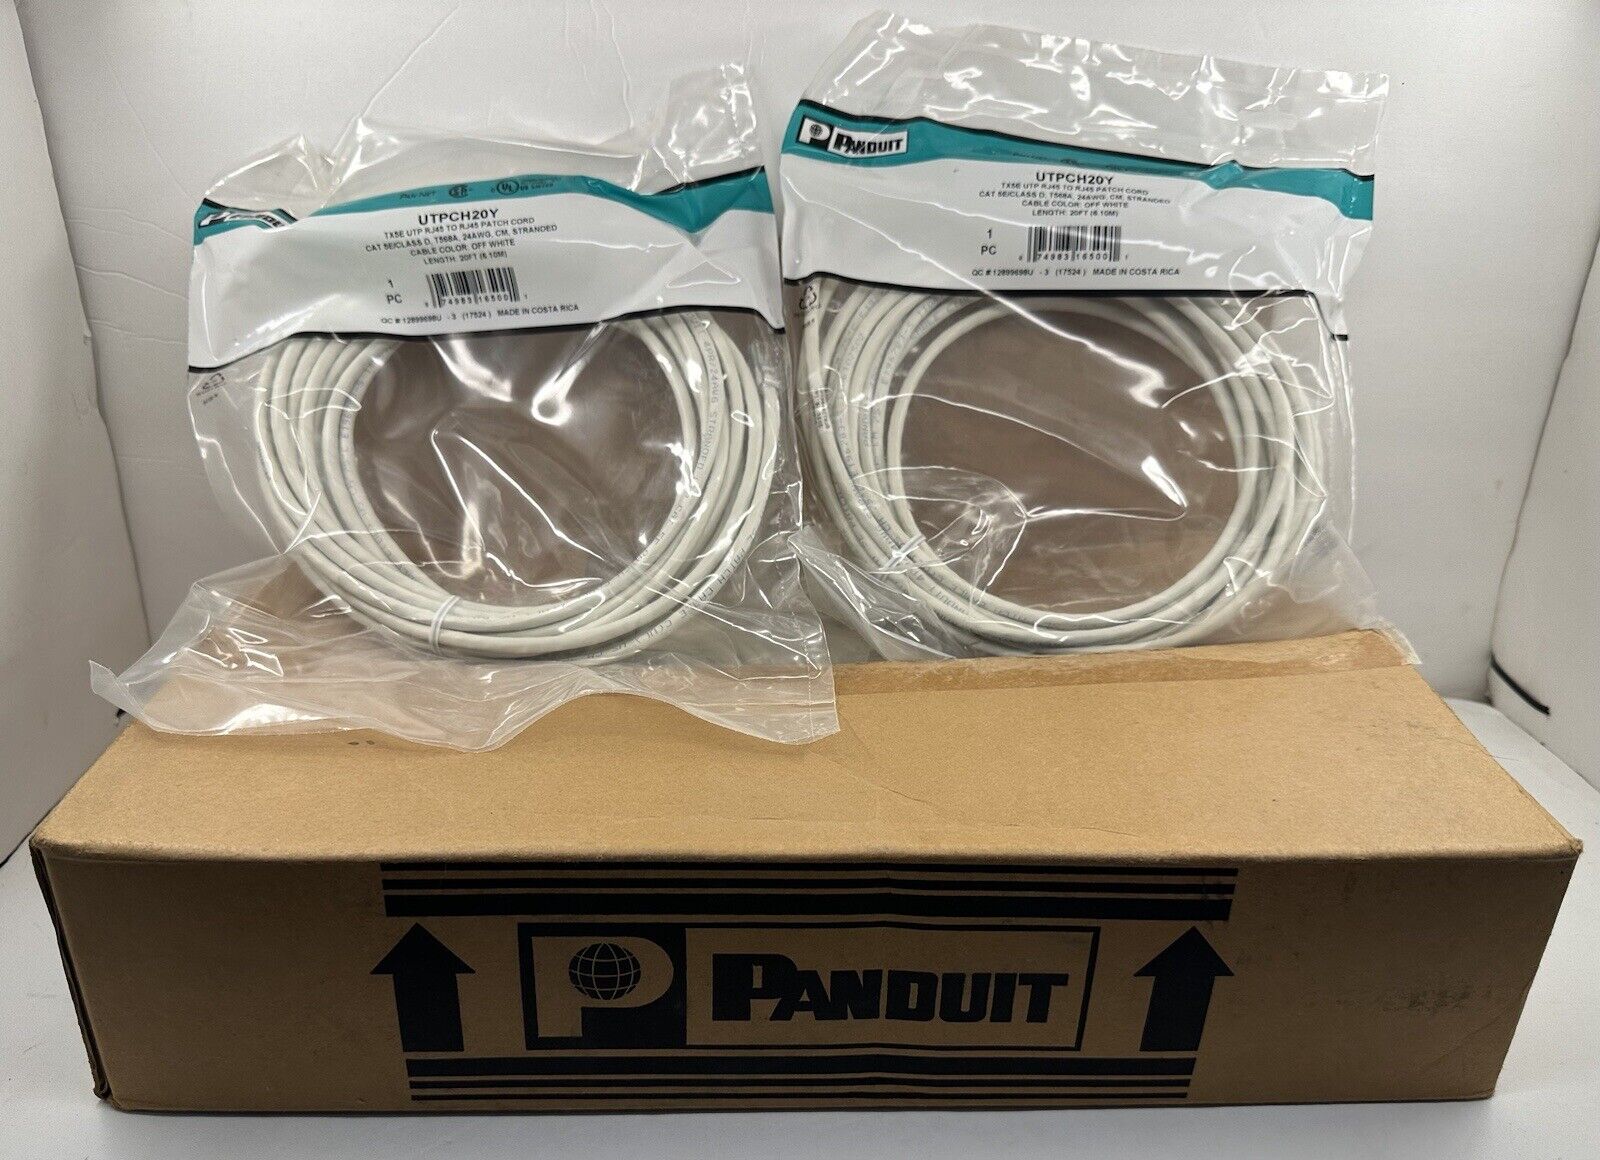 Panduit UTPCH20Y 20’  Off White Patch Cord Cat 5e - Box of 10